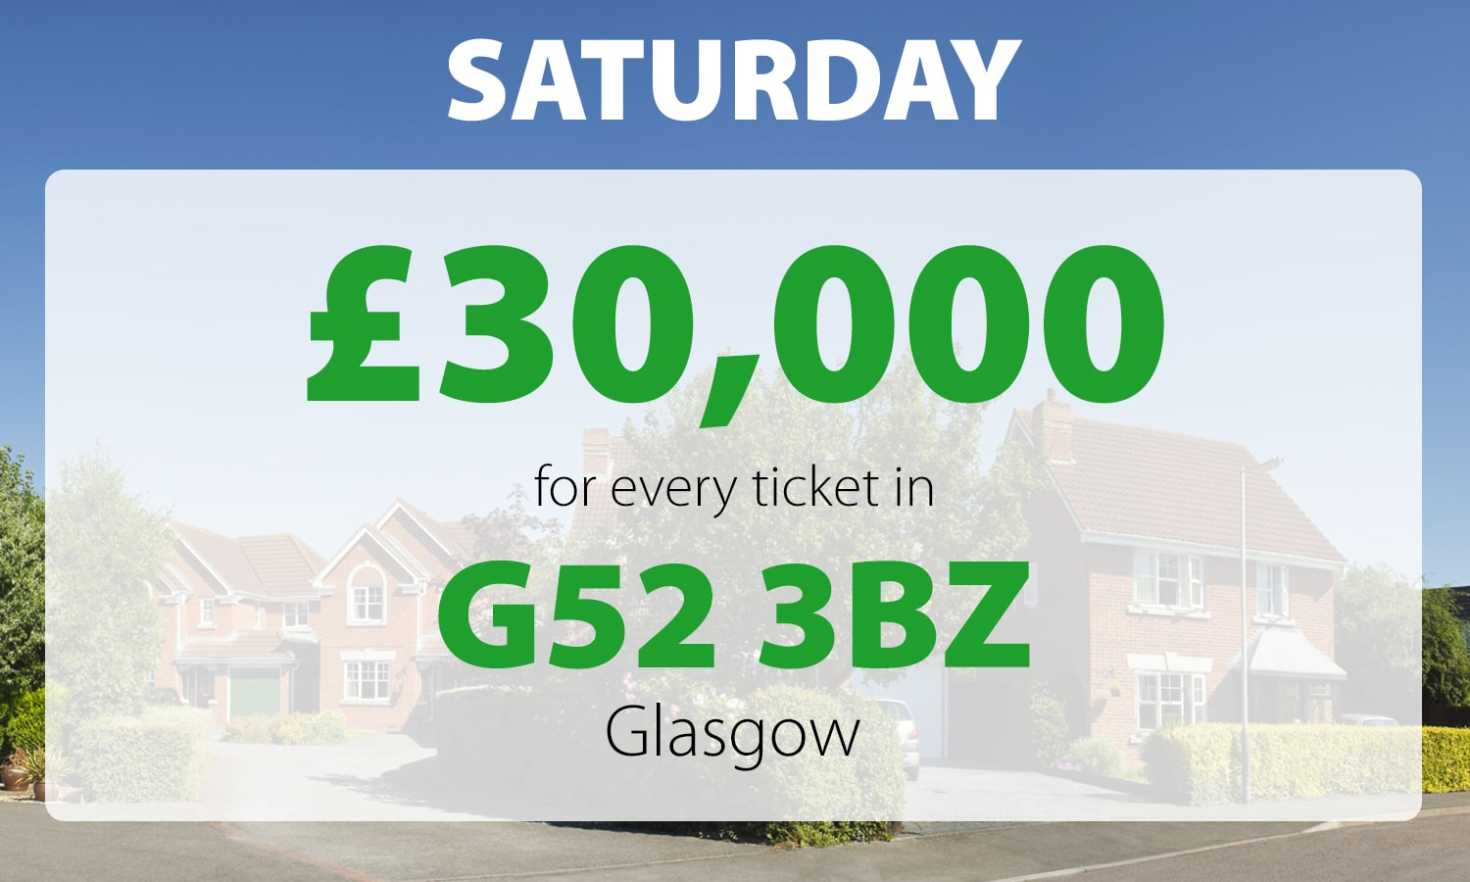 Two lucky Glasgow players have won £30,000 each thanks to their postcode